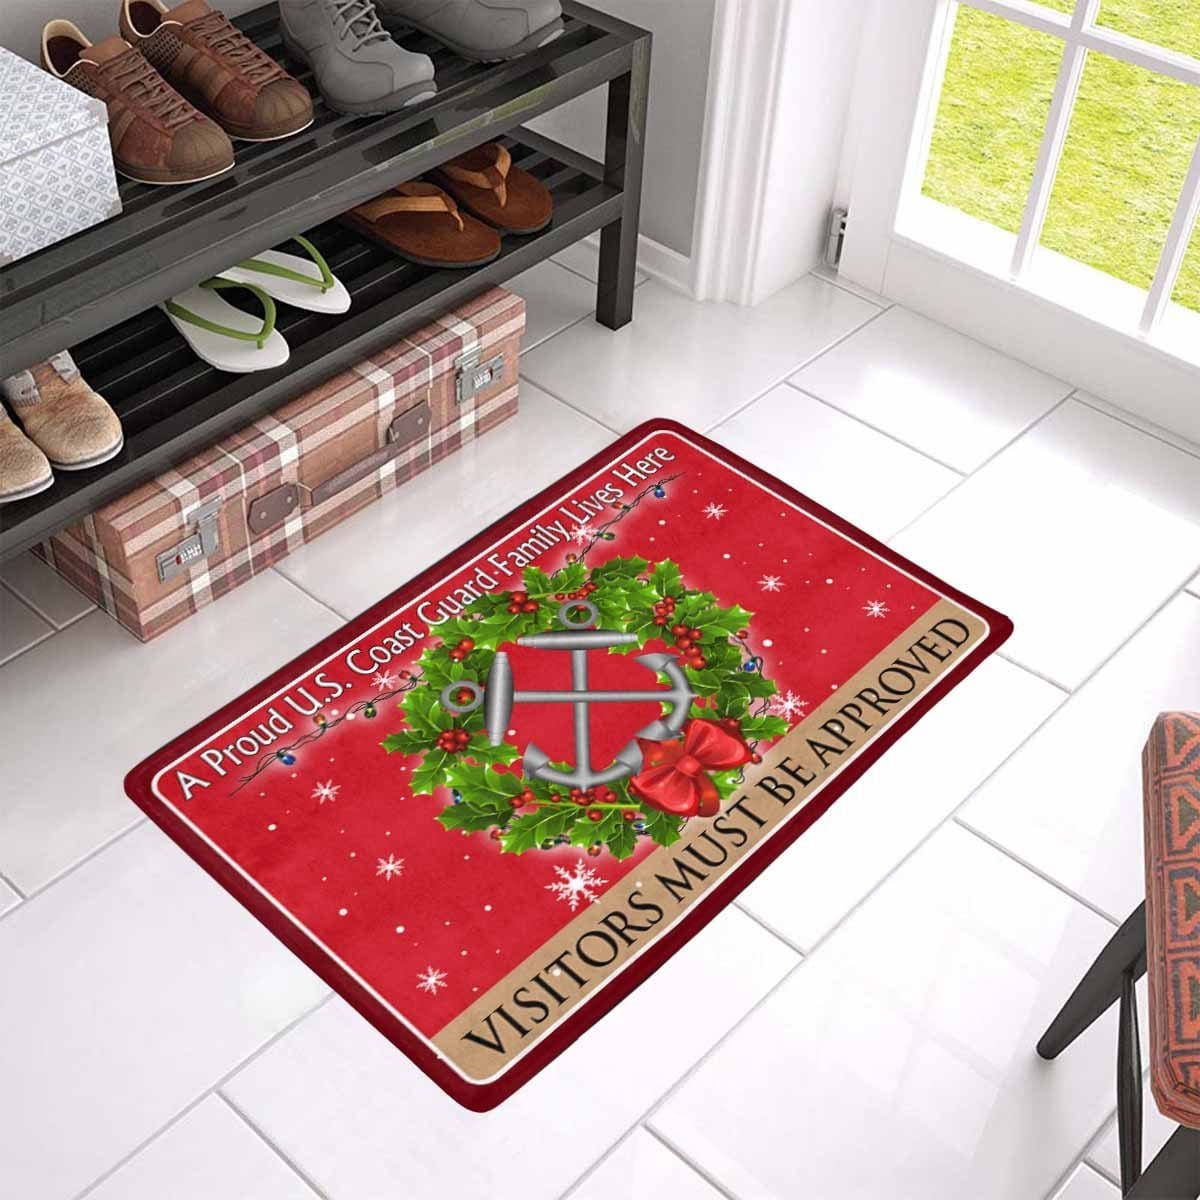 US Coast Guard Boatswains Mate BM Logo - Visitors must be approved Christmas Doormat-Doormat-USCG-Rate-Veterans Nation